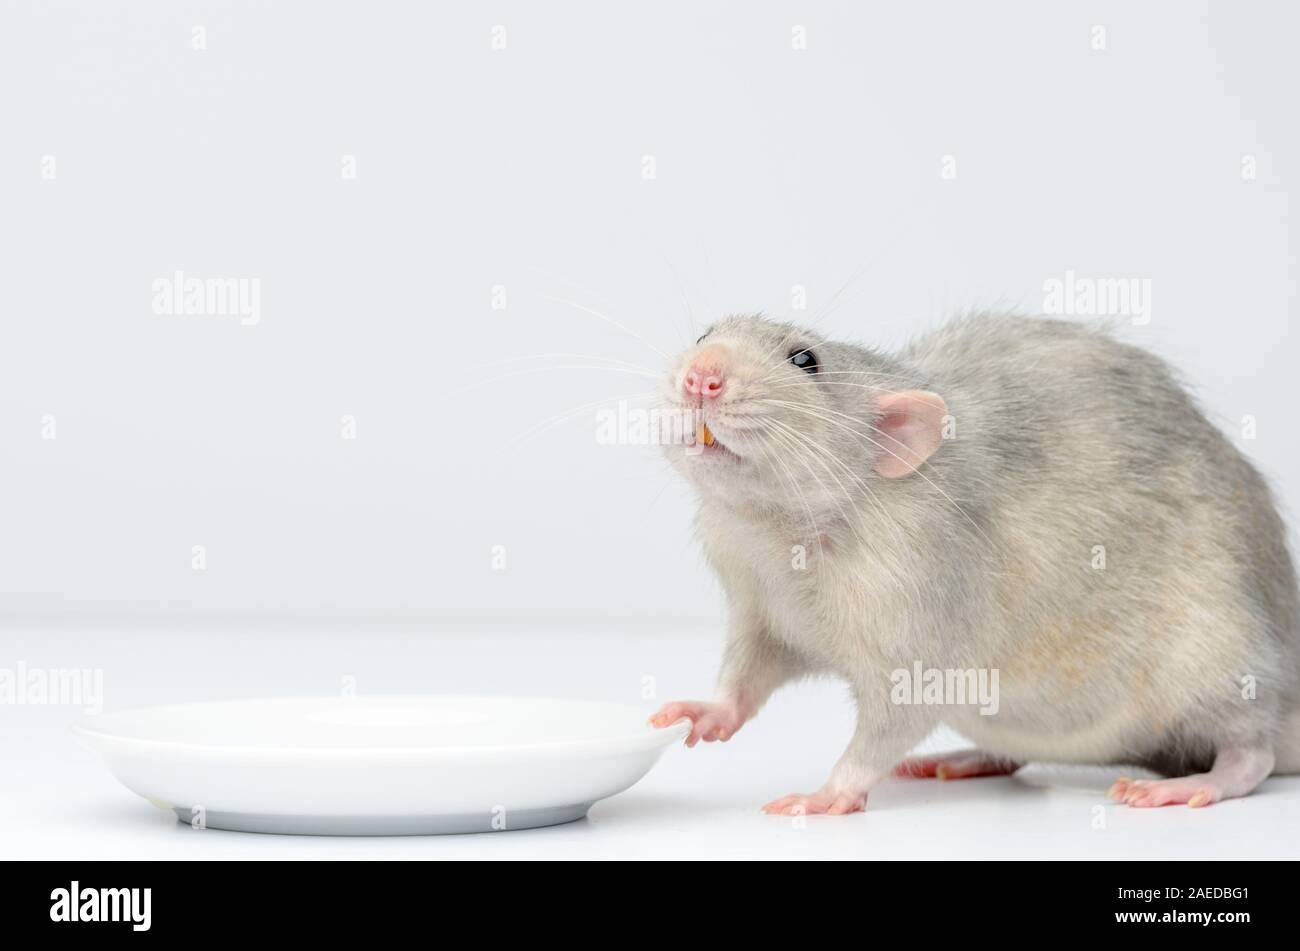 A silver rat sits next to a white saucer and waits for food. Rat close up. Stock Photo